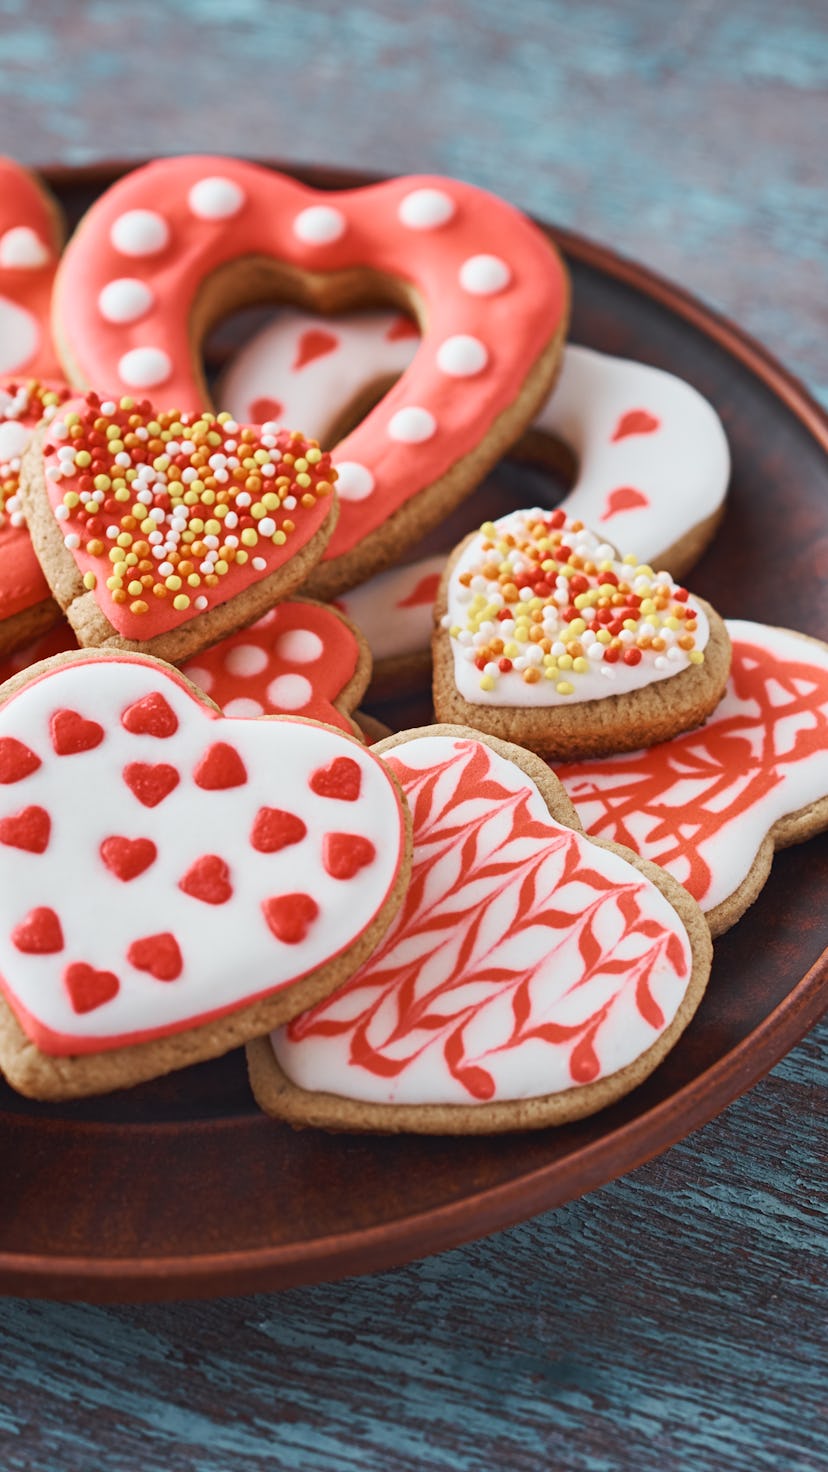 Heart-shaped Valentine's Day desserts include cookies and cakes.